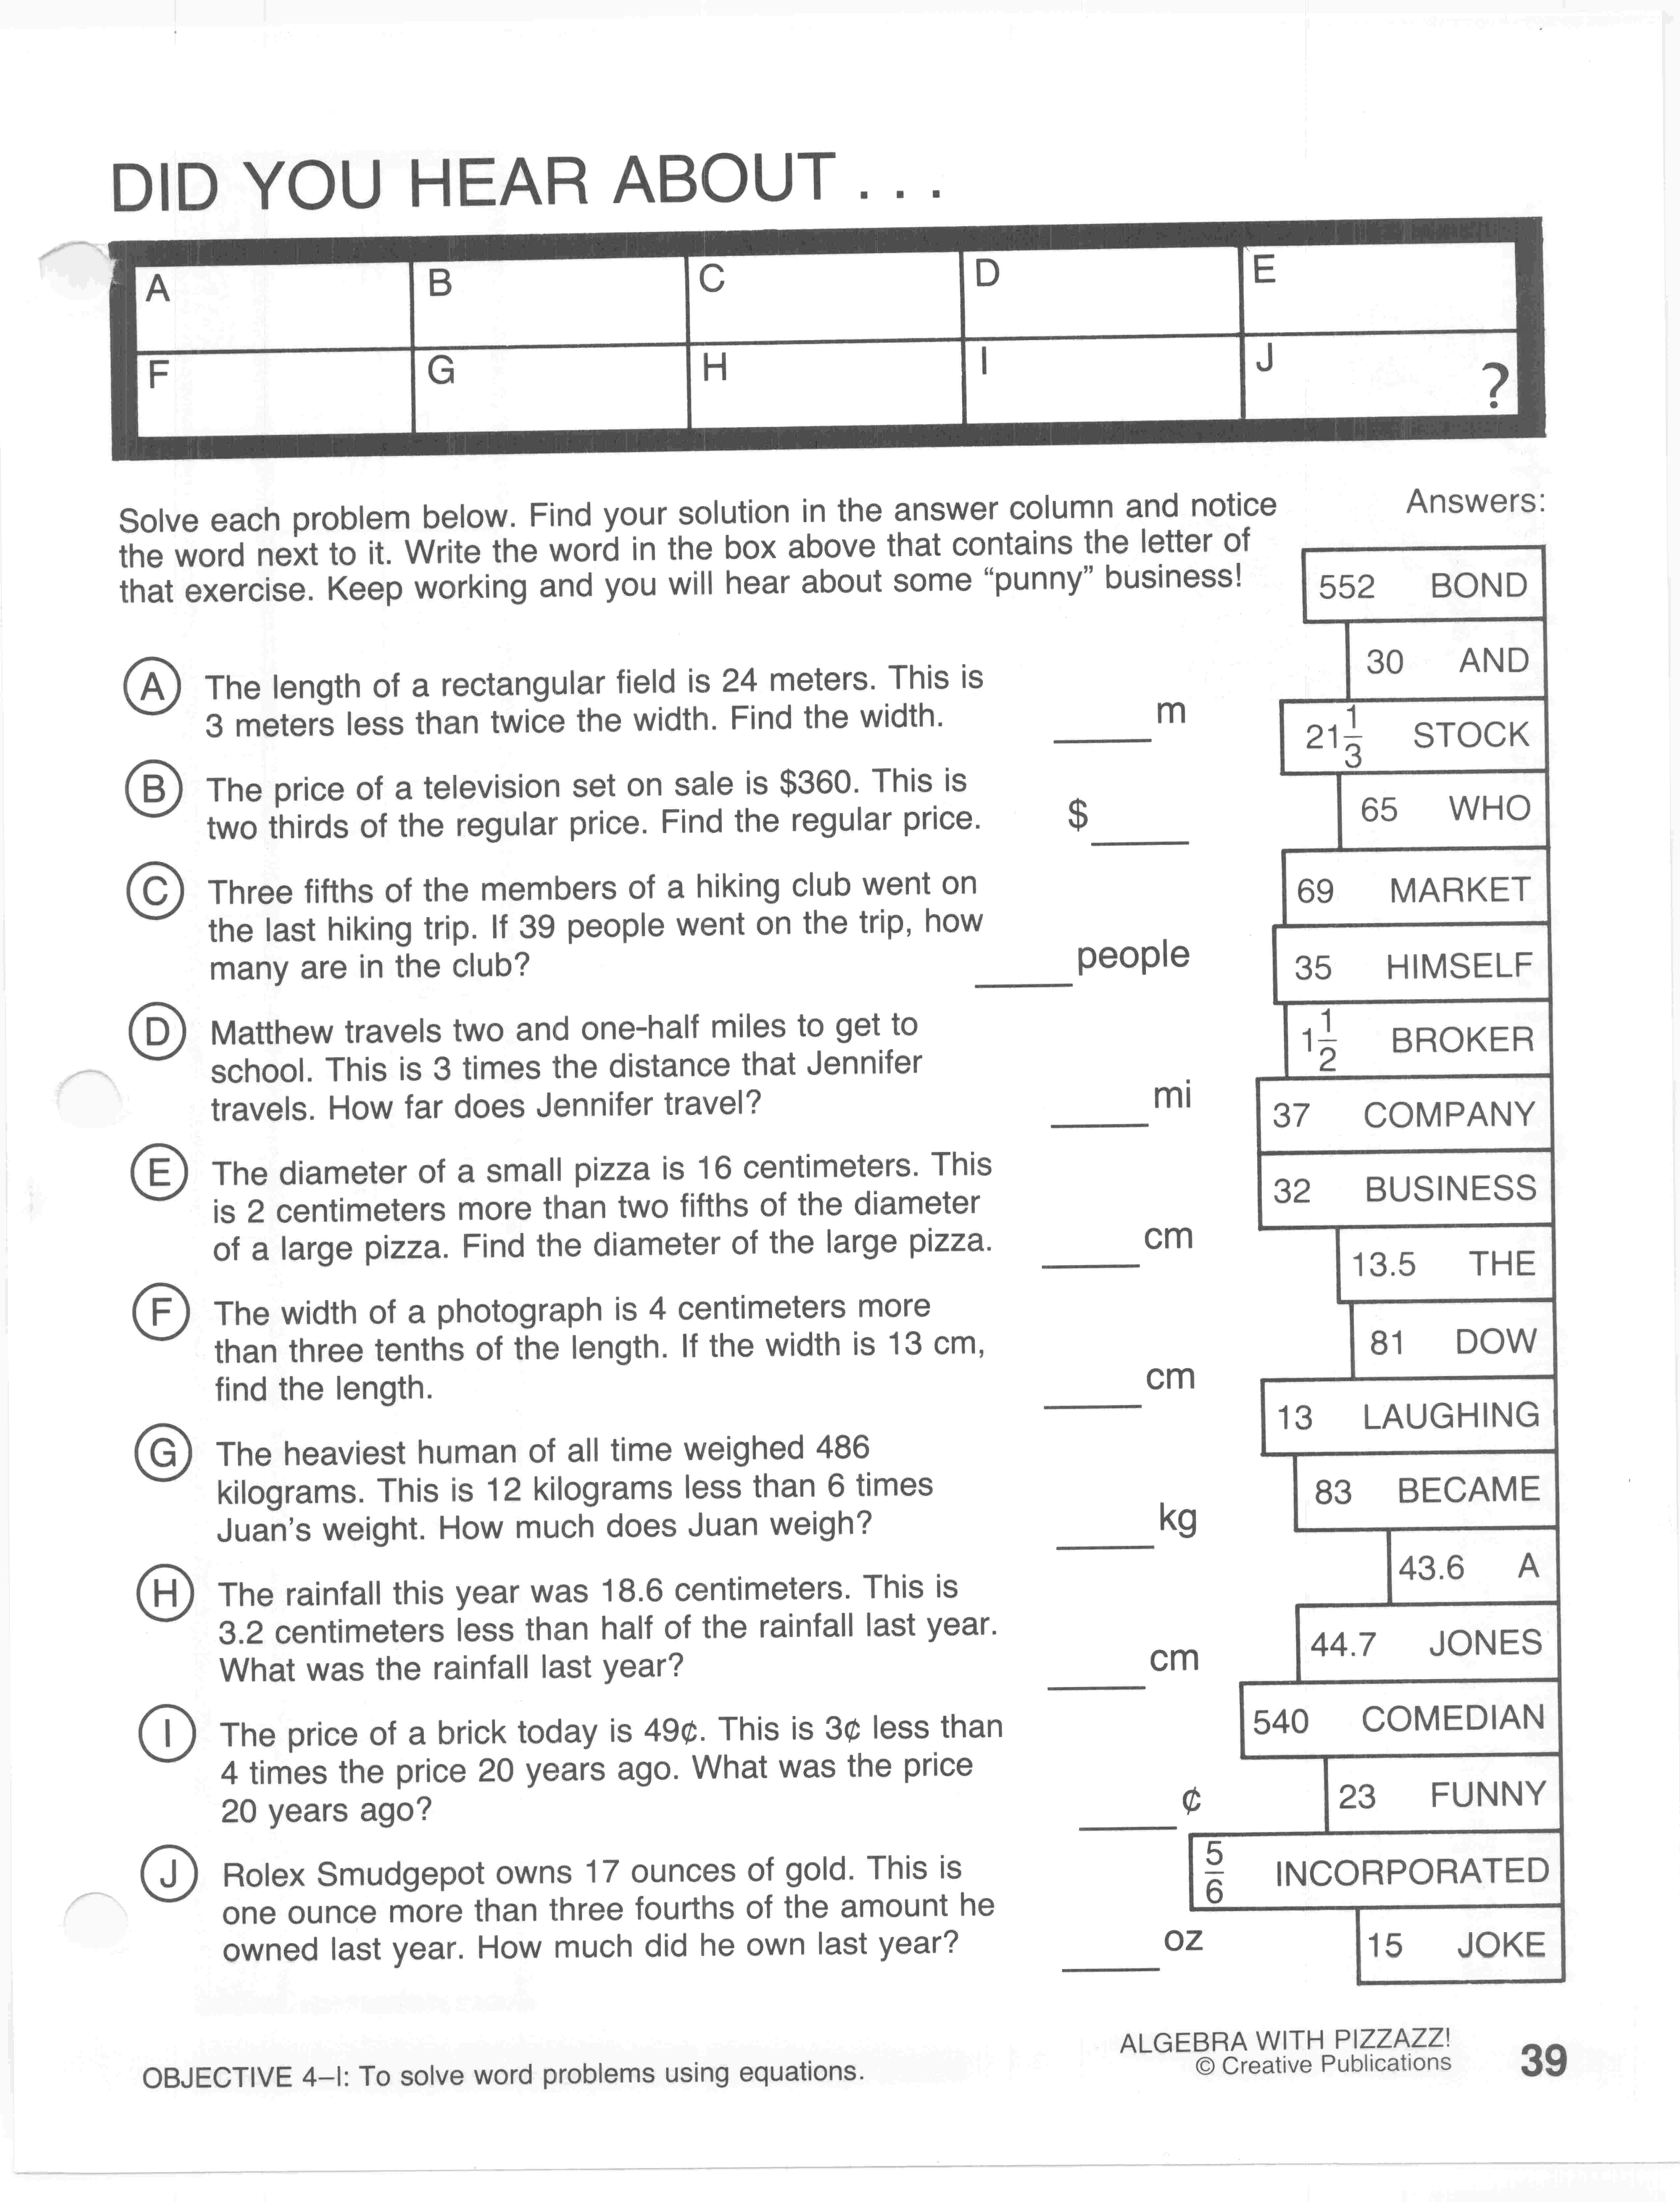 Did You Hear About Math Worksheet Answers B 37 11919672405 – Math Pertaining To Did U Hear About Math Worksheet Answers